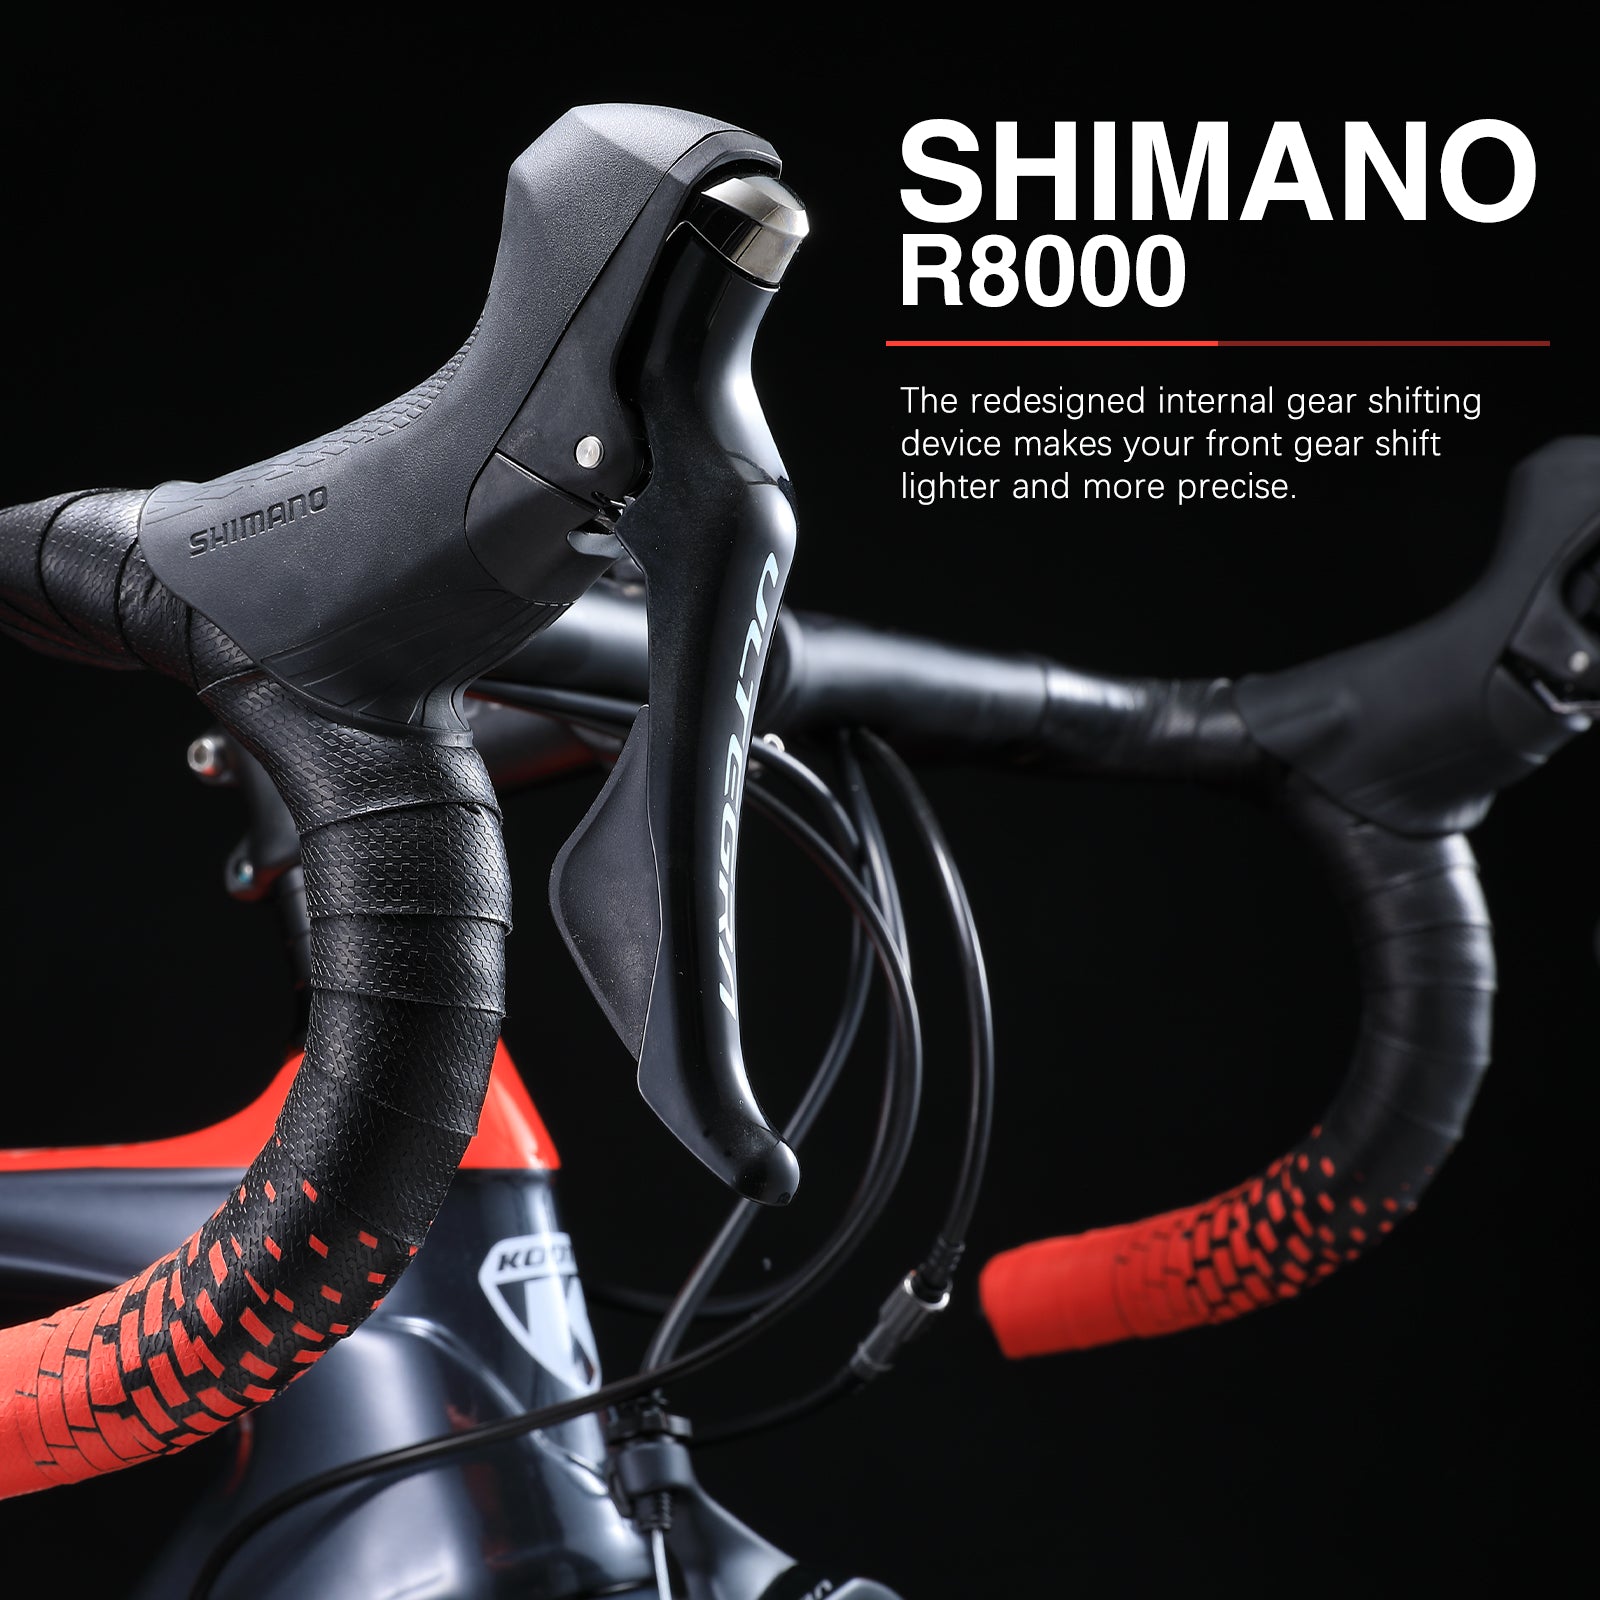 shimano R8000 shifter lever-kootu r03 carbon road bike with shimano ultegra r8000 groupset 22 speed